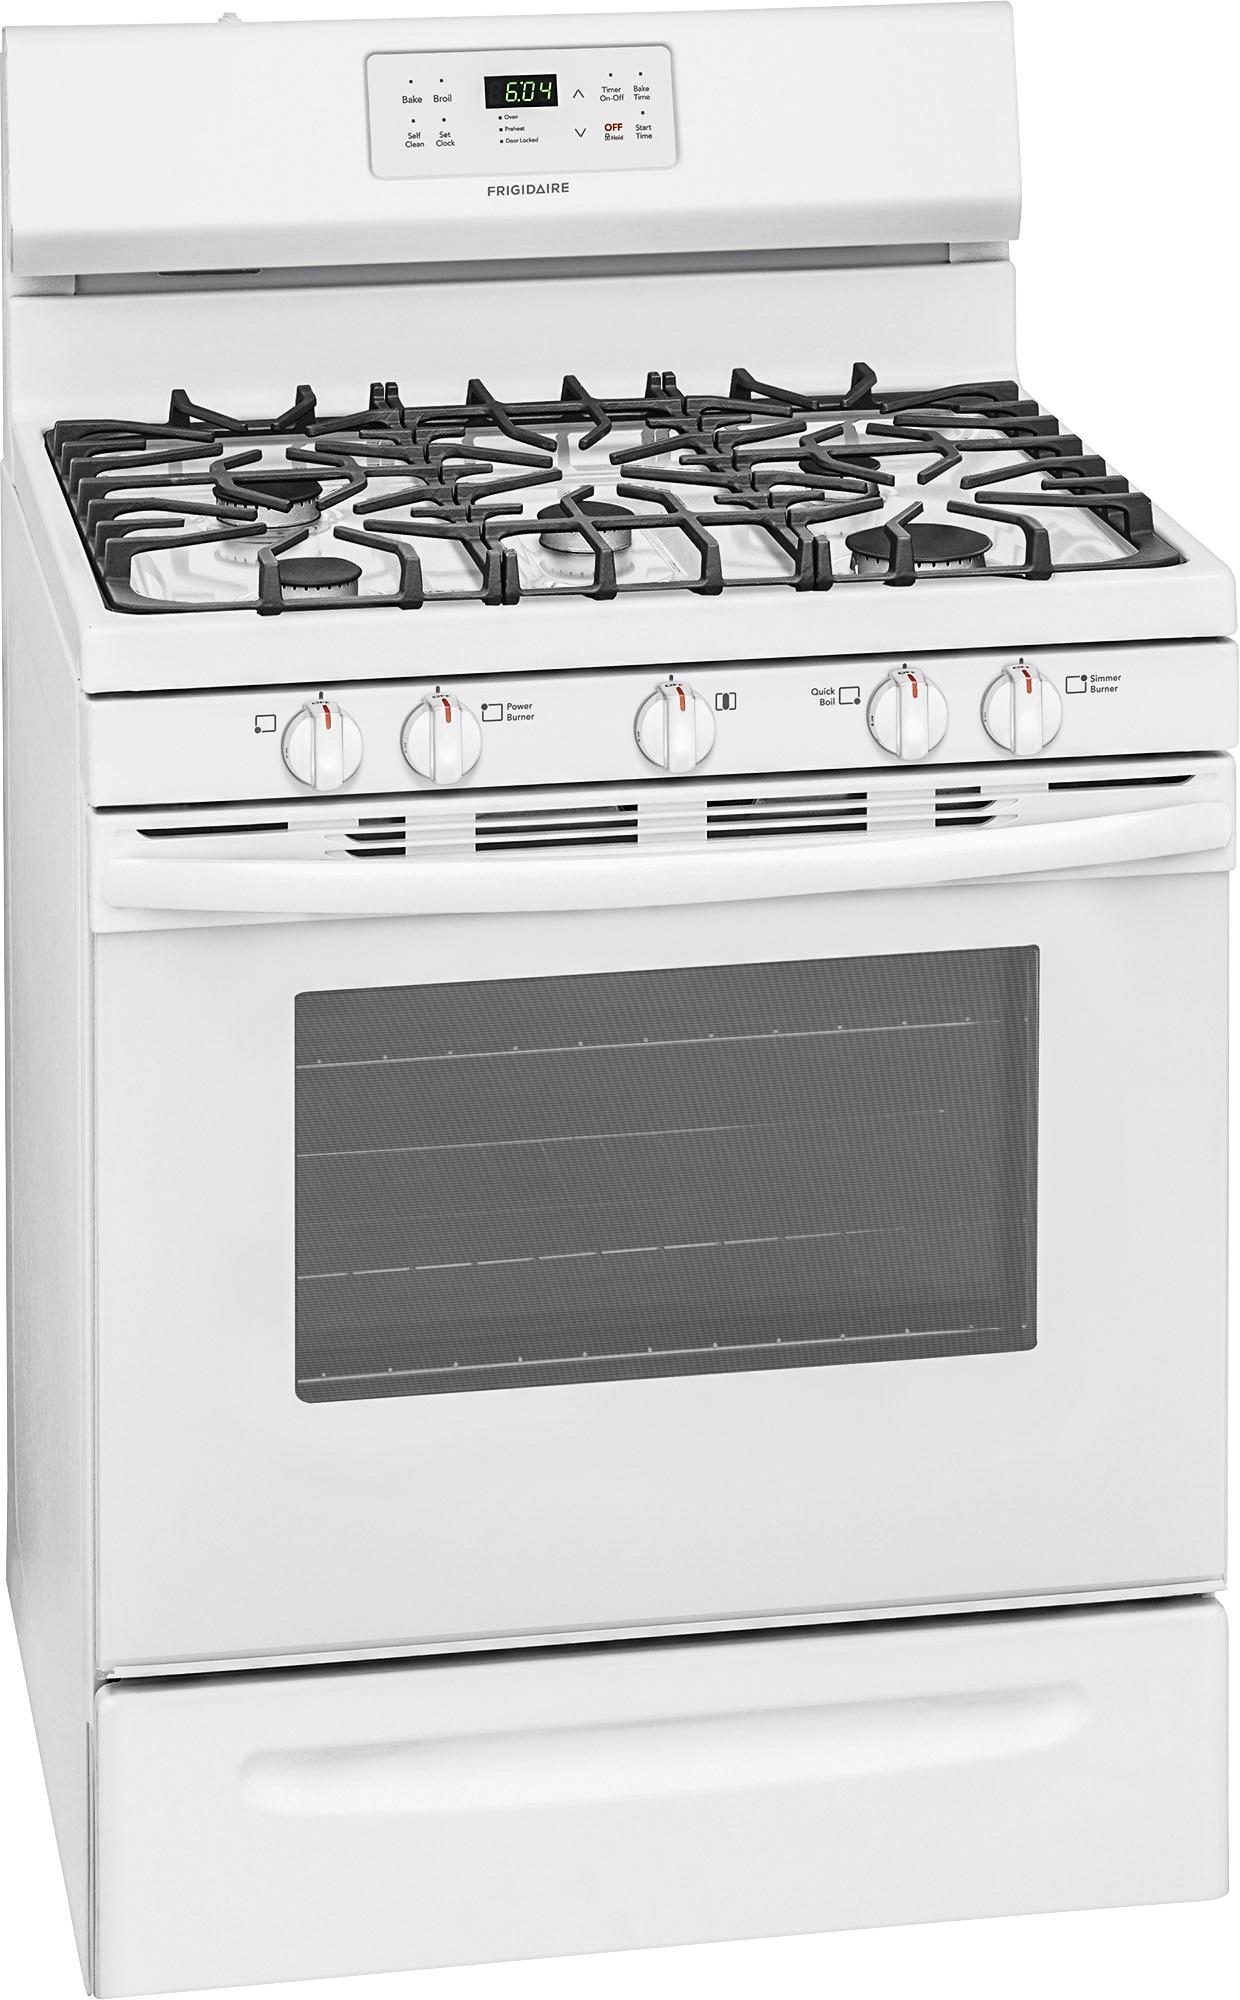 Angle View: Viking - Professional 5 Series 35.9" LP Gas Cooktop - Stainless steel